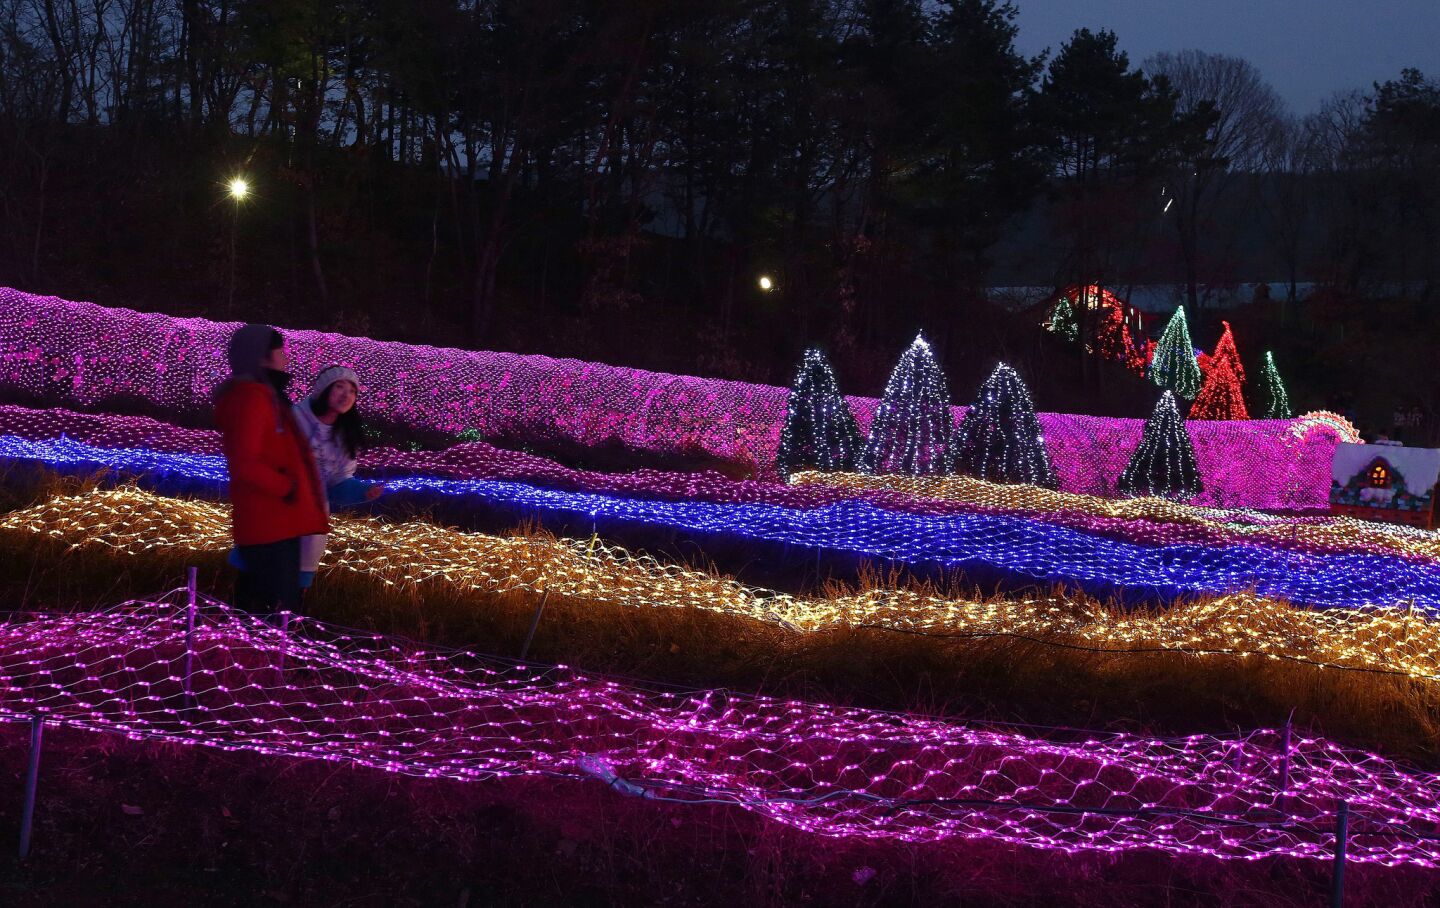 It's a blanket of Christmas lights at Santa Claus Village on Hub Island in Pocheon, South Korea.